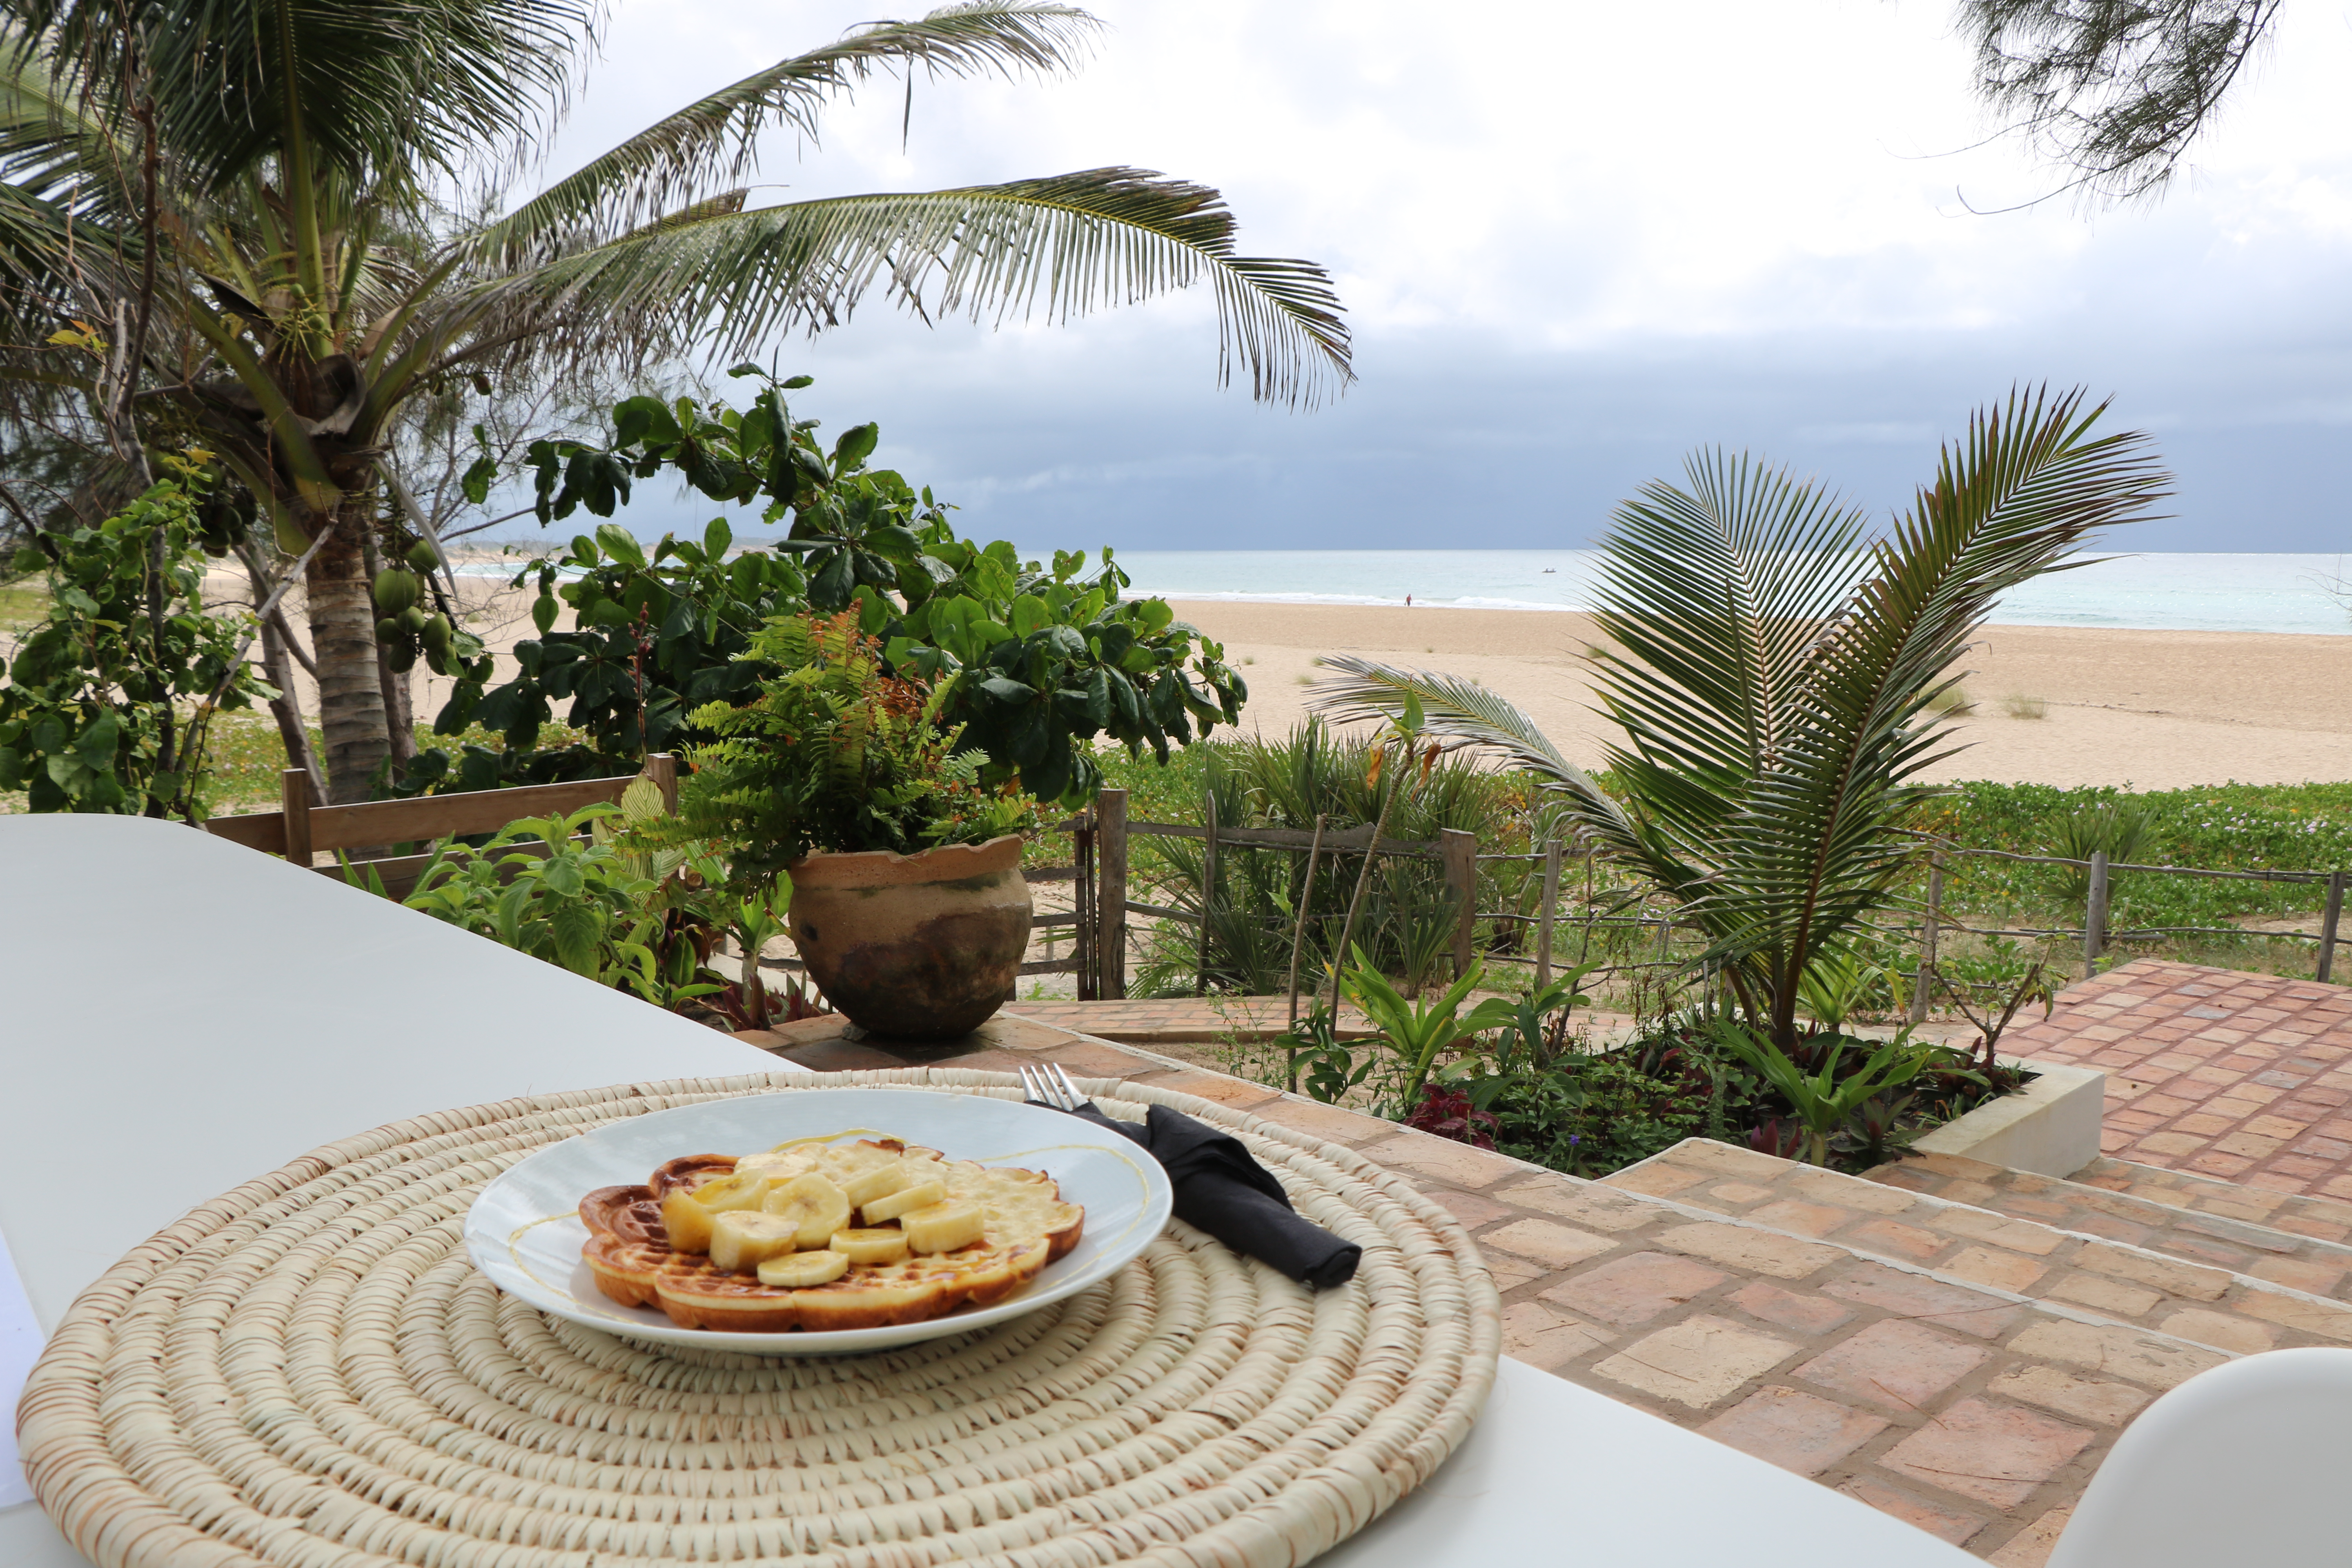 Breakfast with a beach view